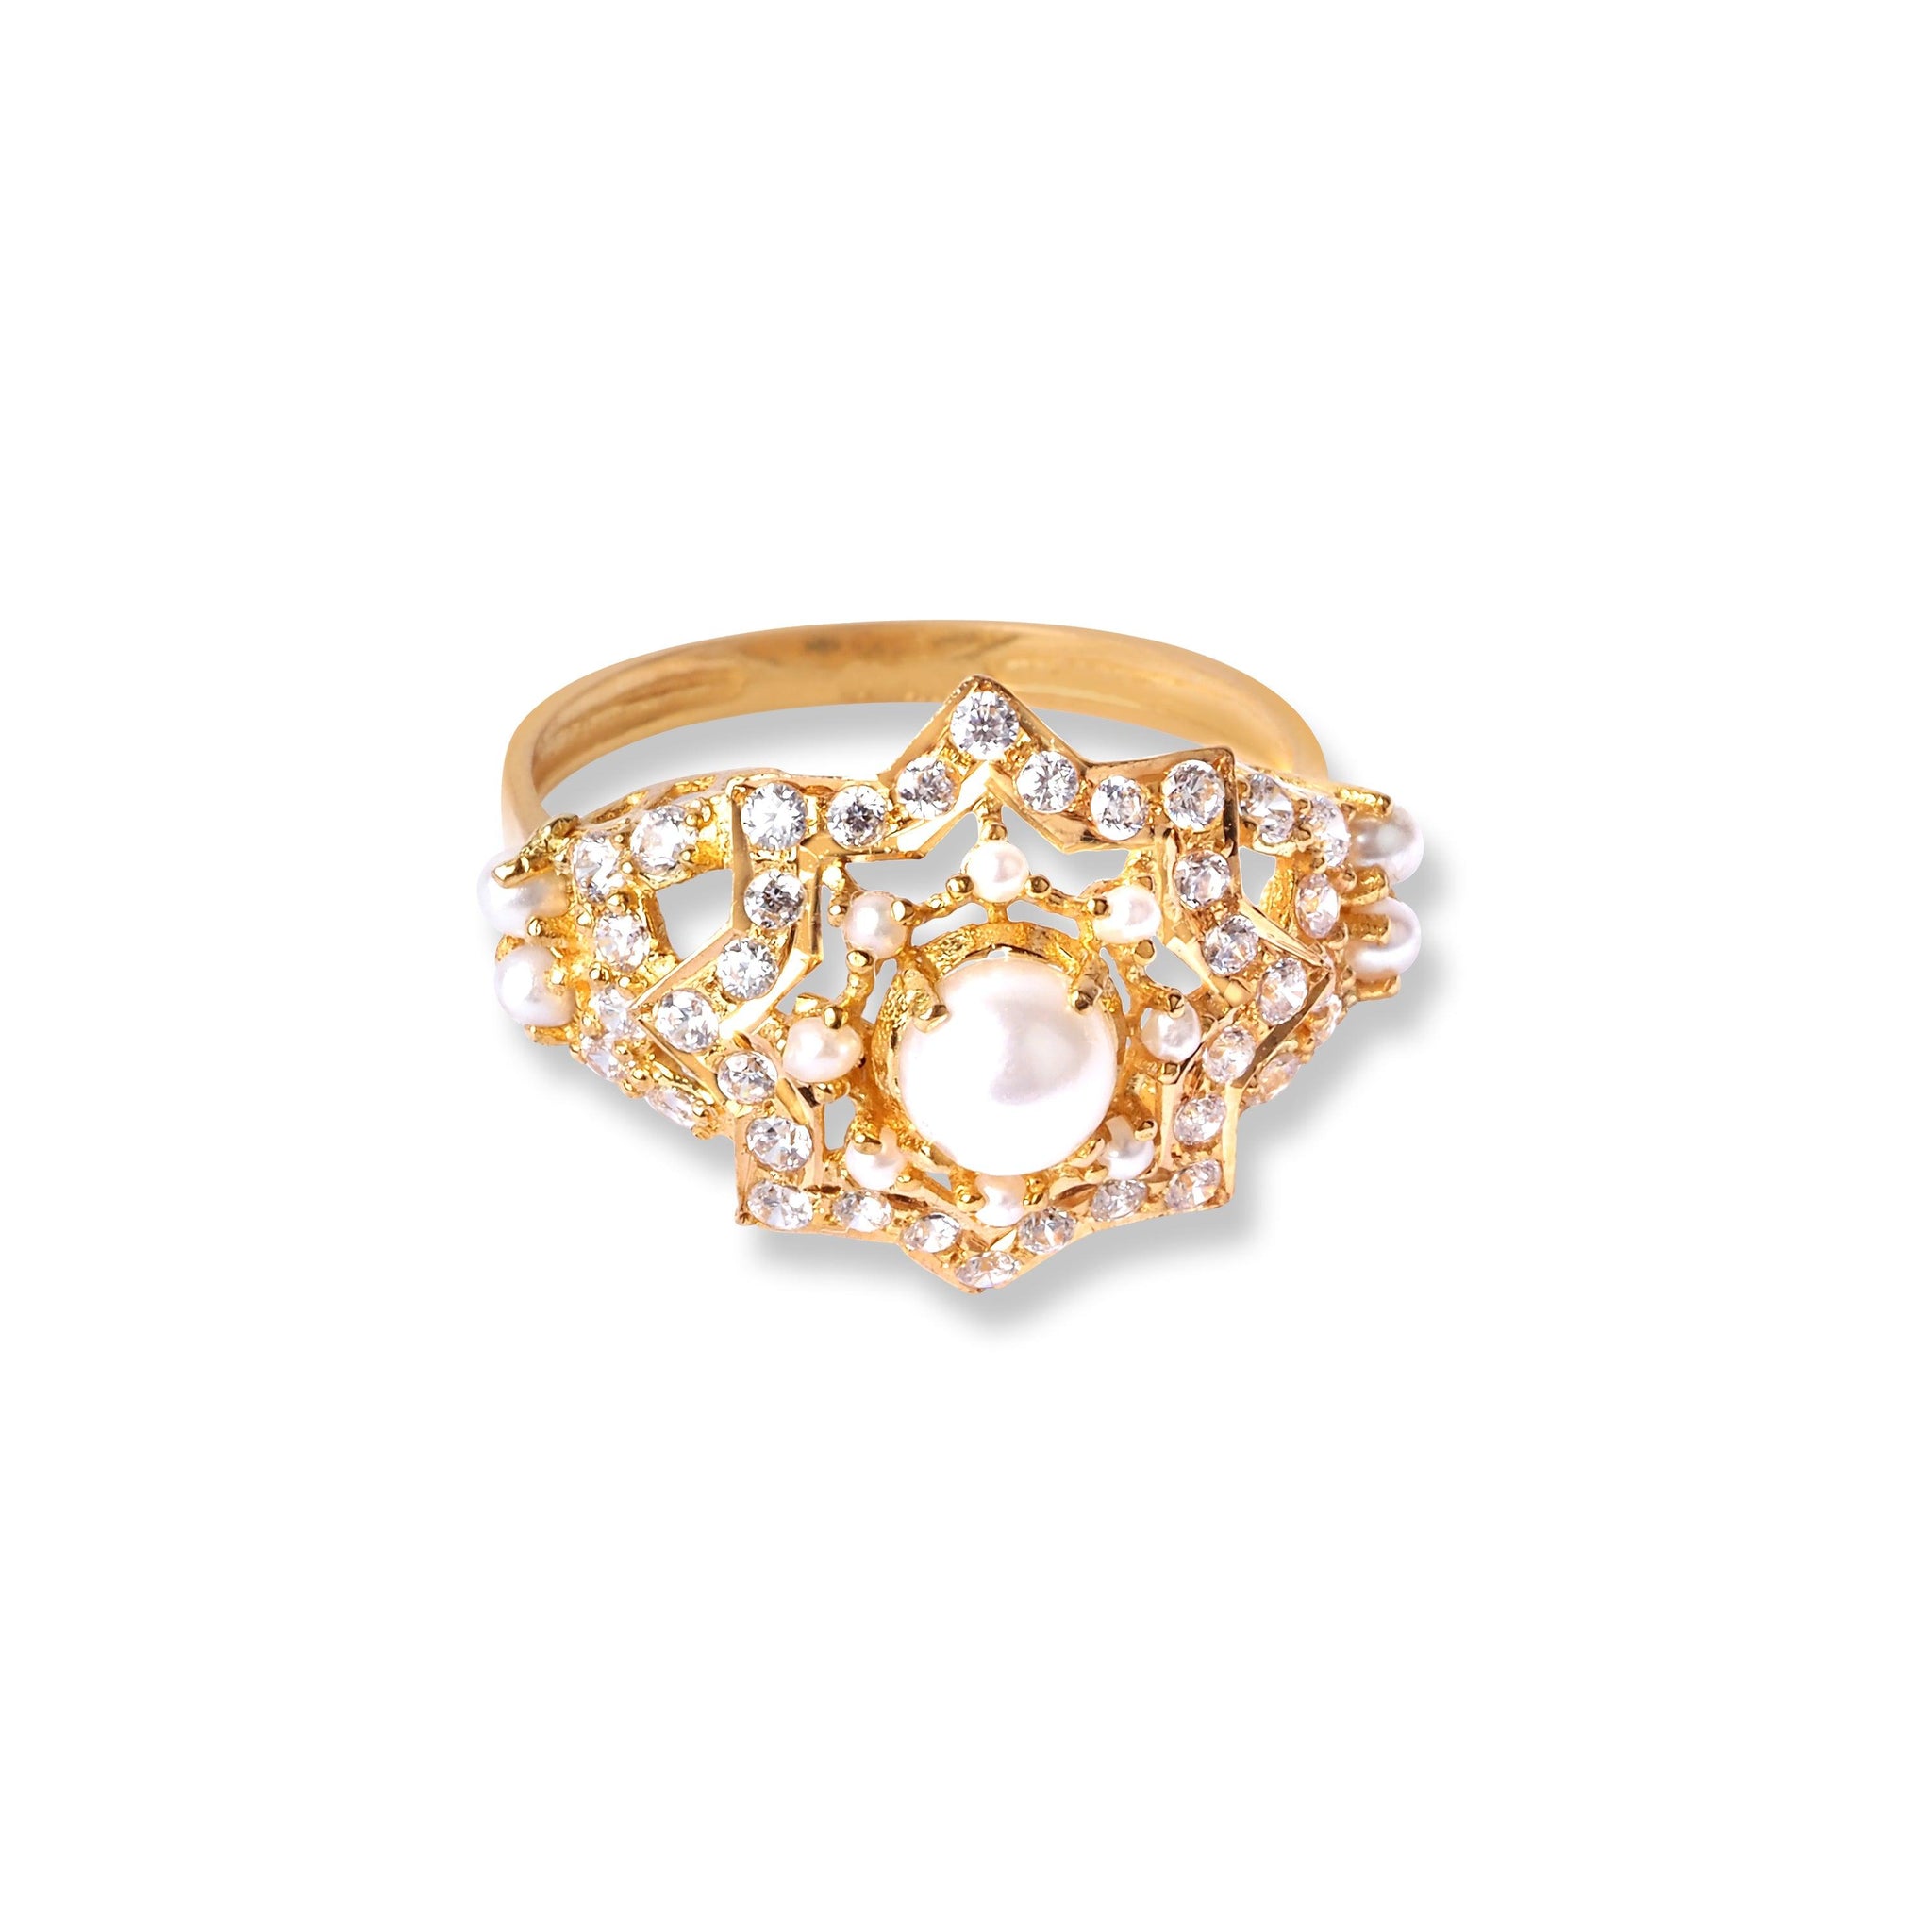 22ct Yellow Gold Ring With Cultured Pearls & Cubic Zirconia Stones (3.7g) LR-16581